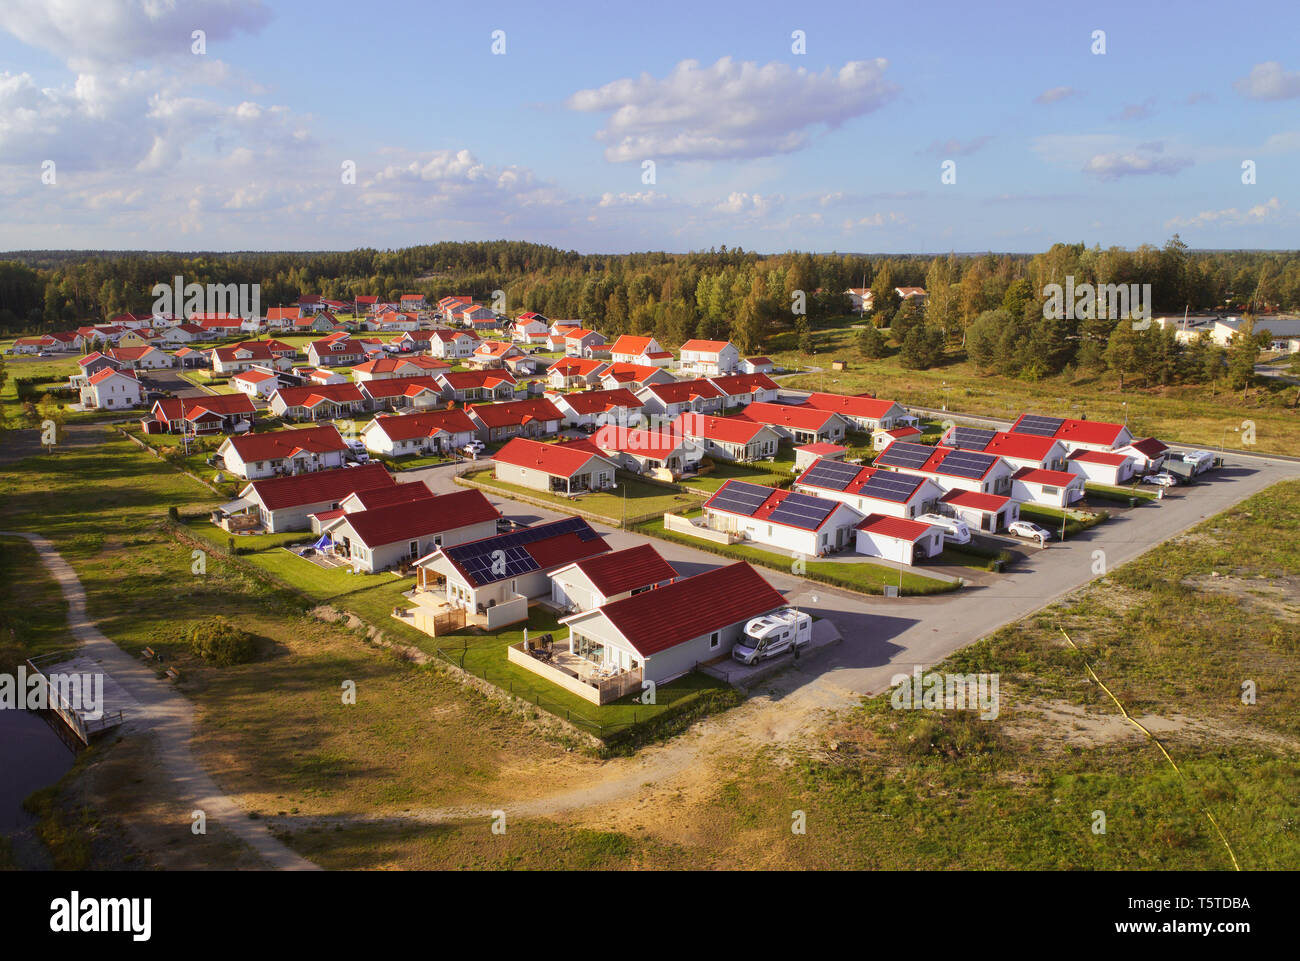 Nykvarn, Sweden - Spetember 9, 2018: Areial view of a residential area with one-family houses some with solar panels. Stock Photo